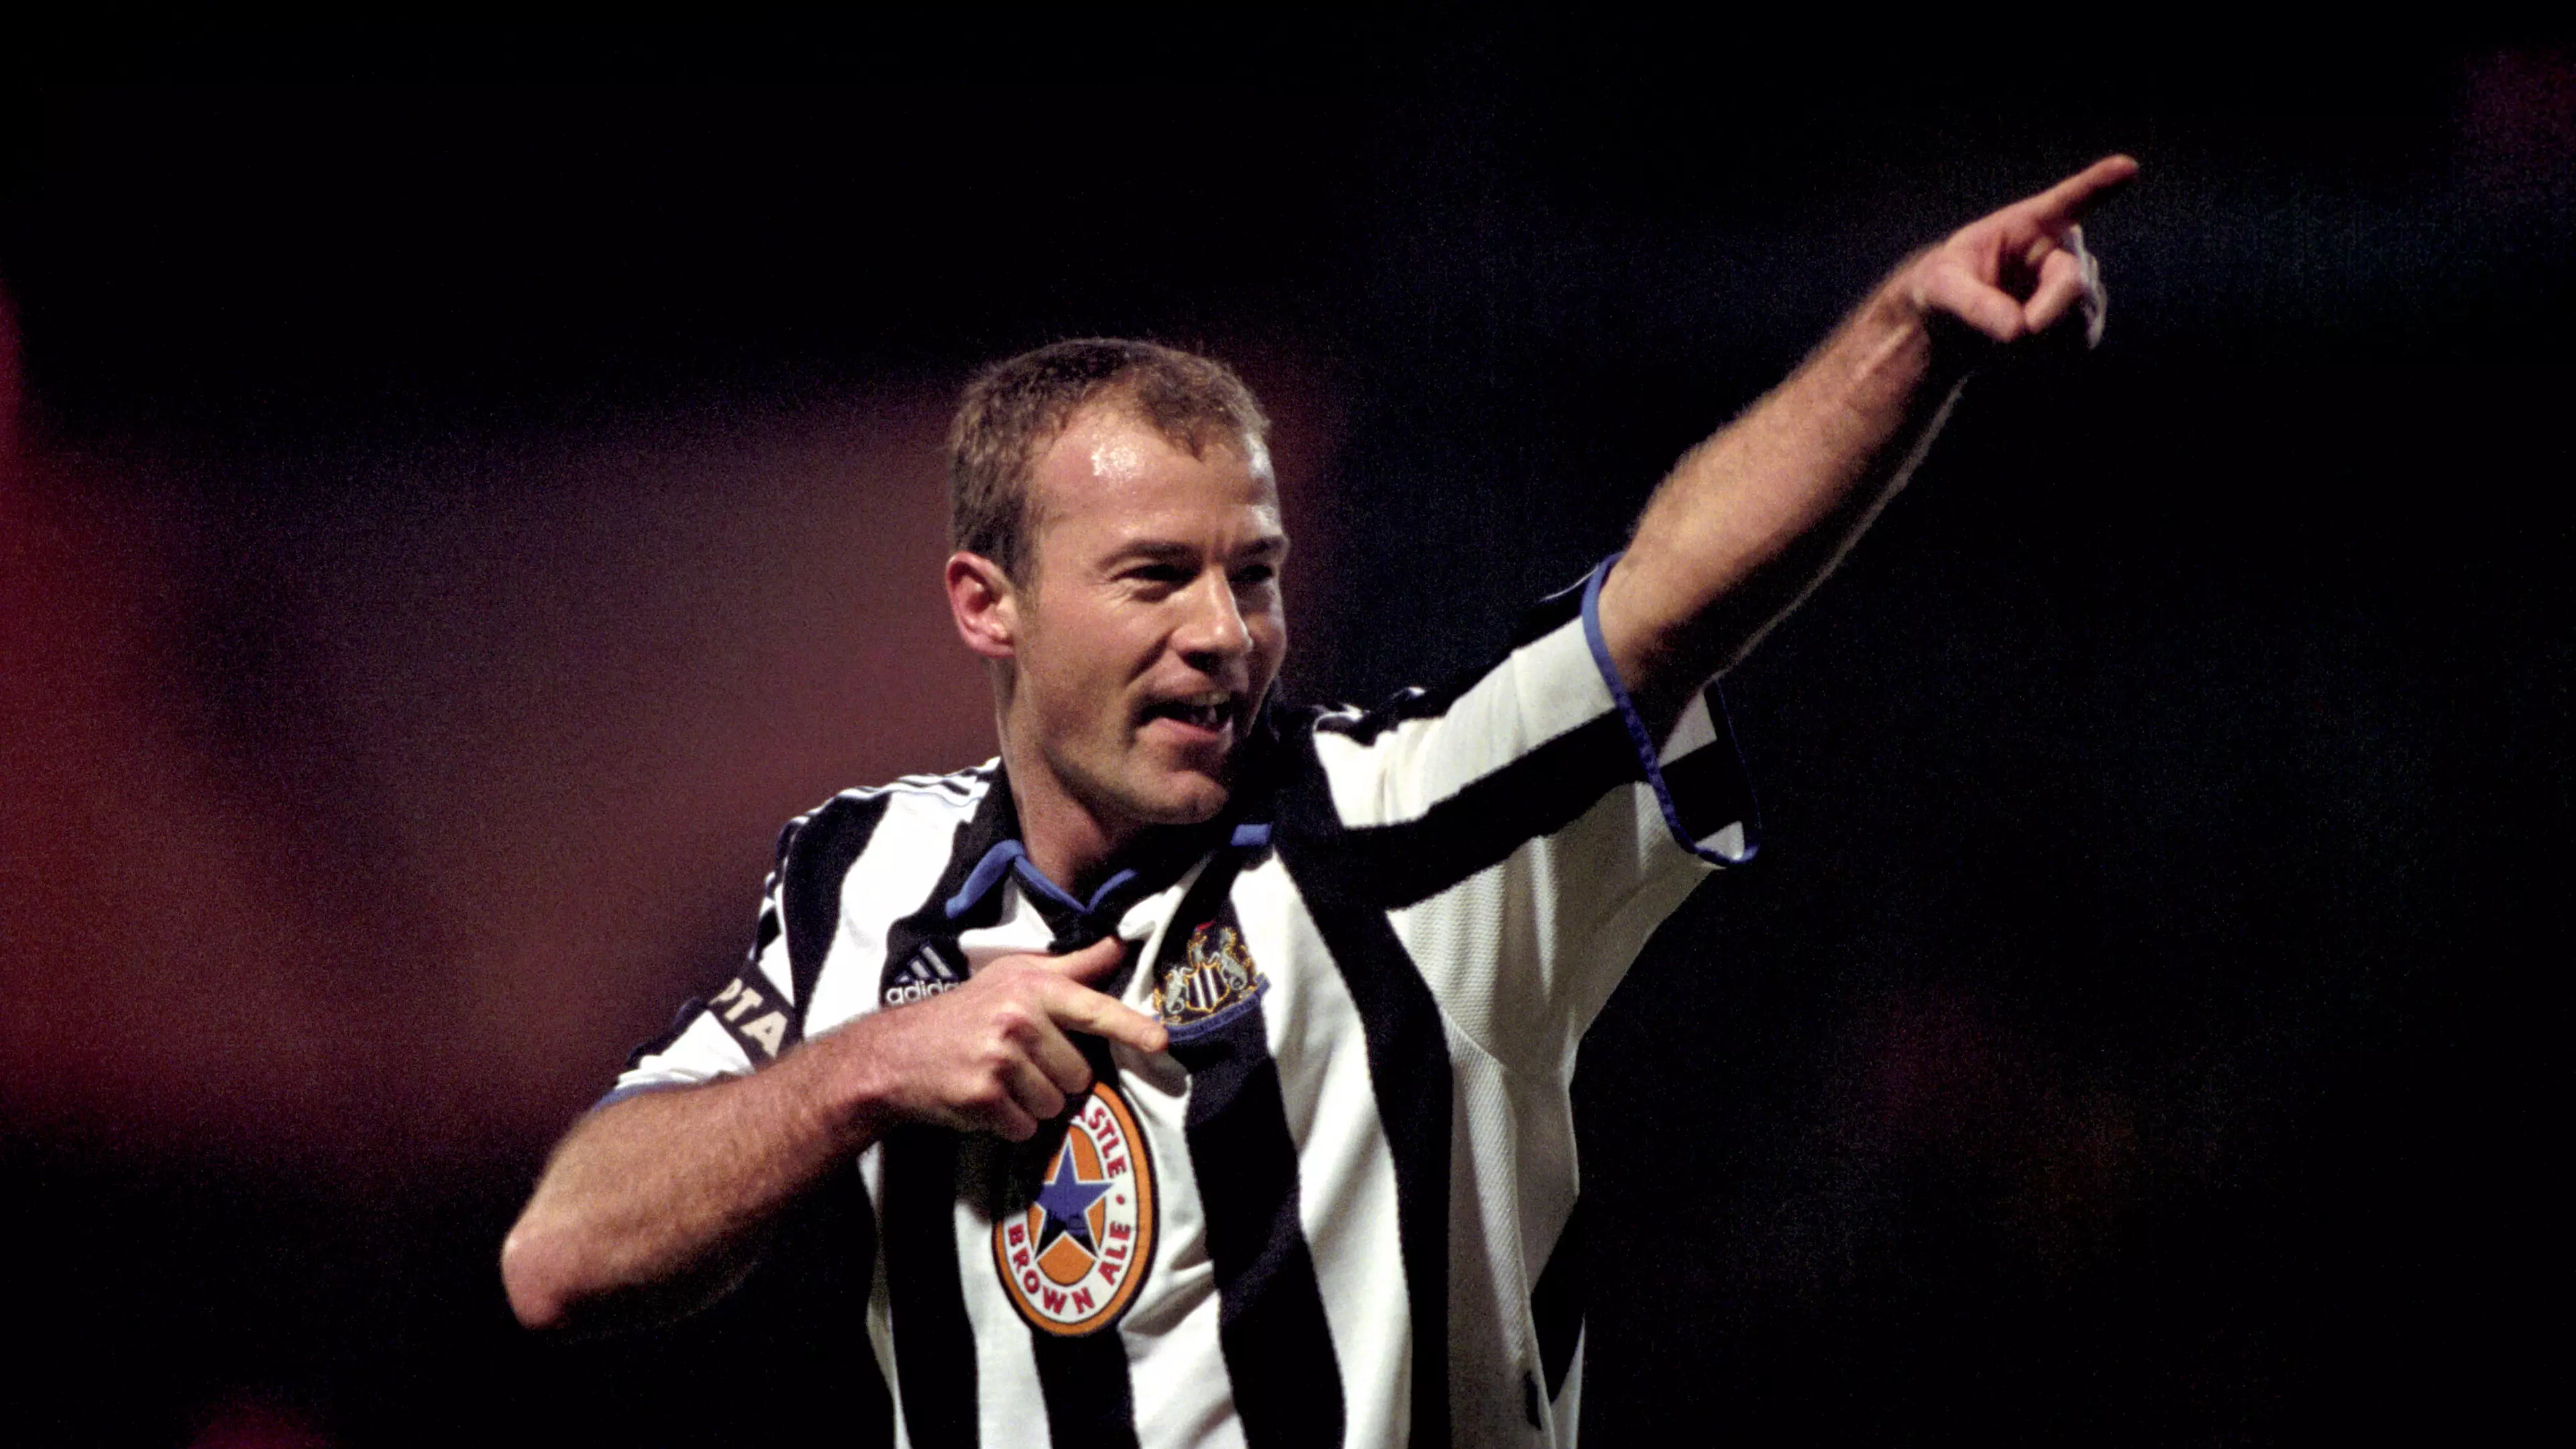 Alan Shearer Names The Player Who He Thinks Could Break His Record